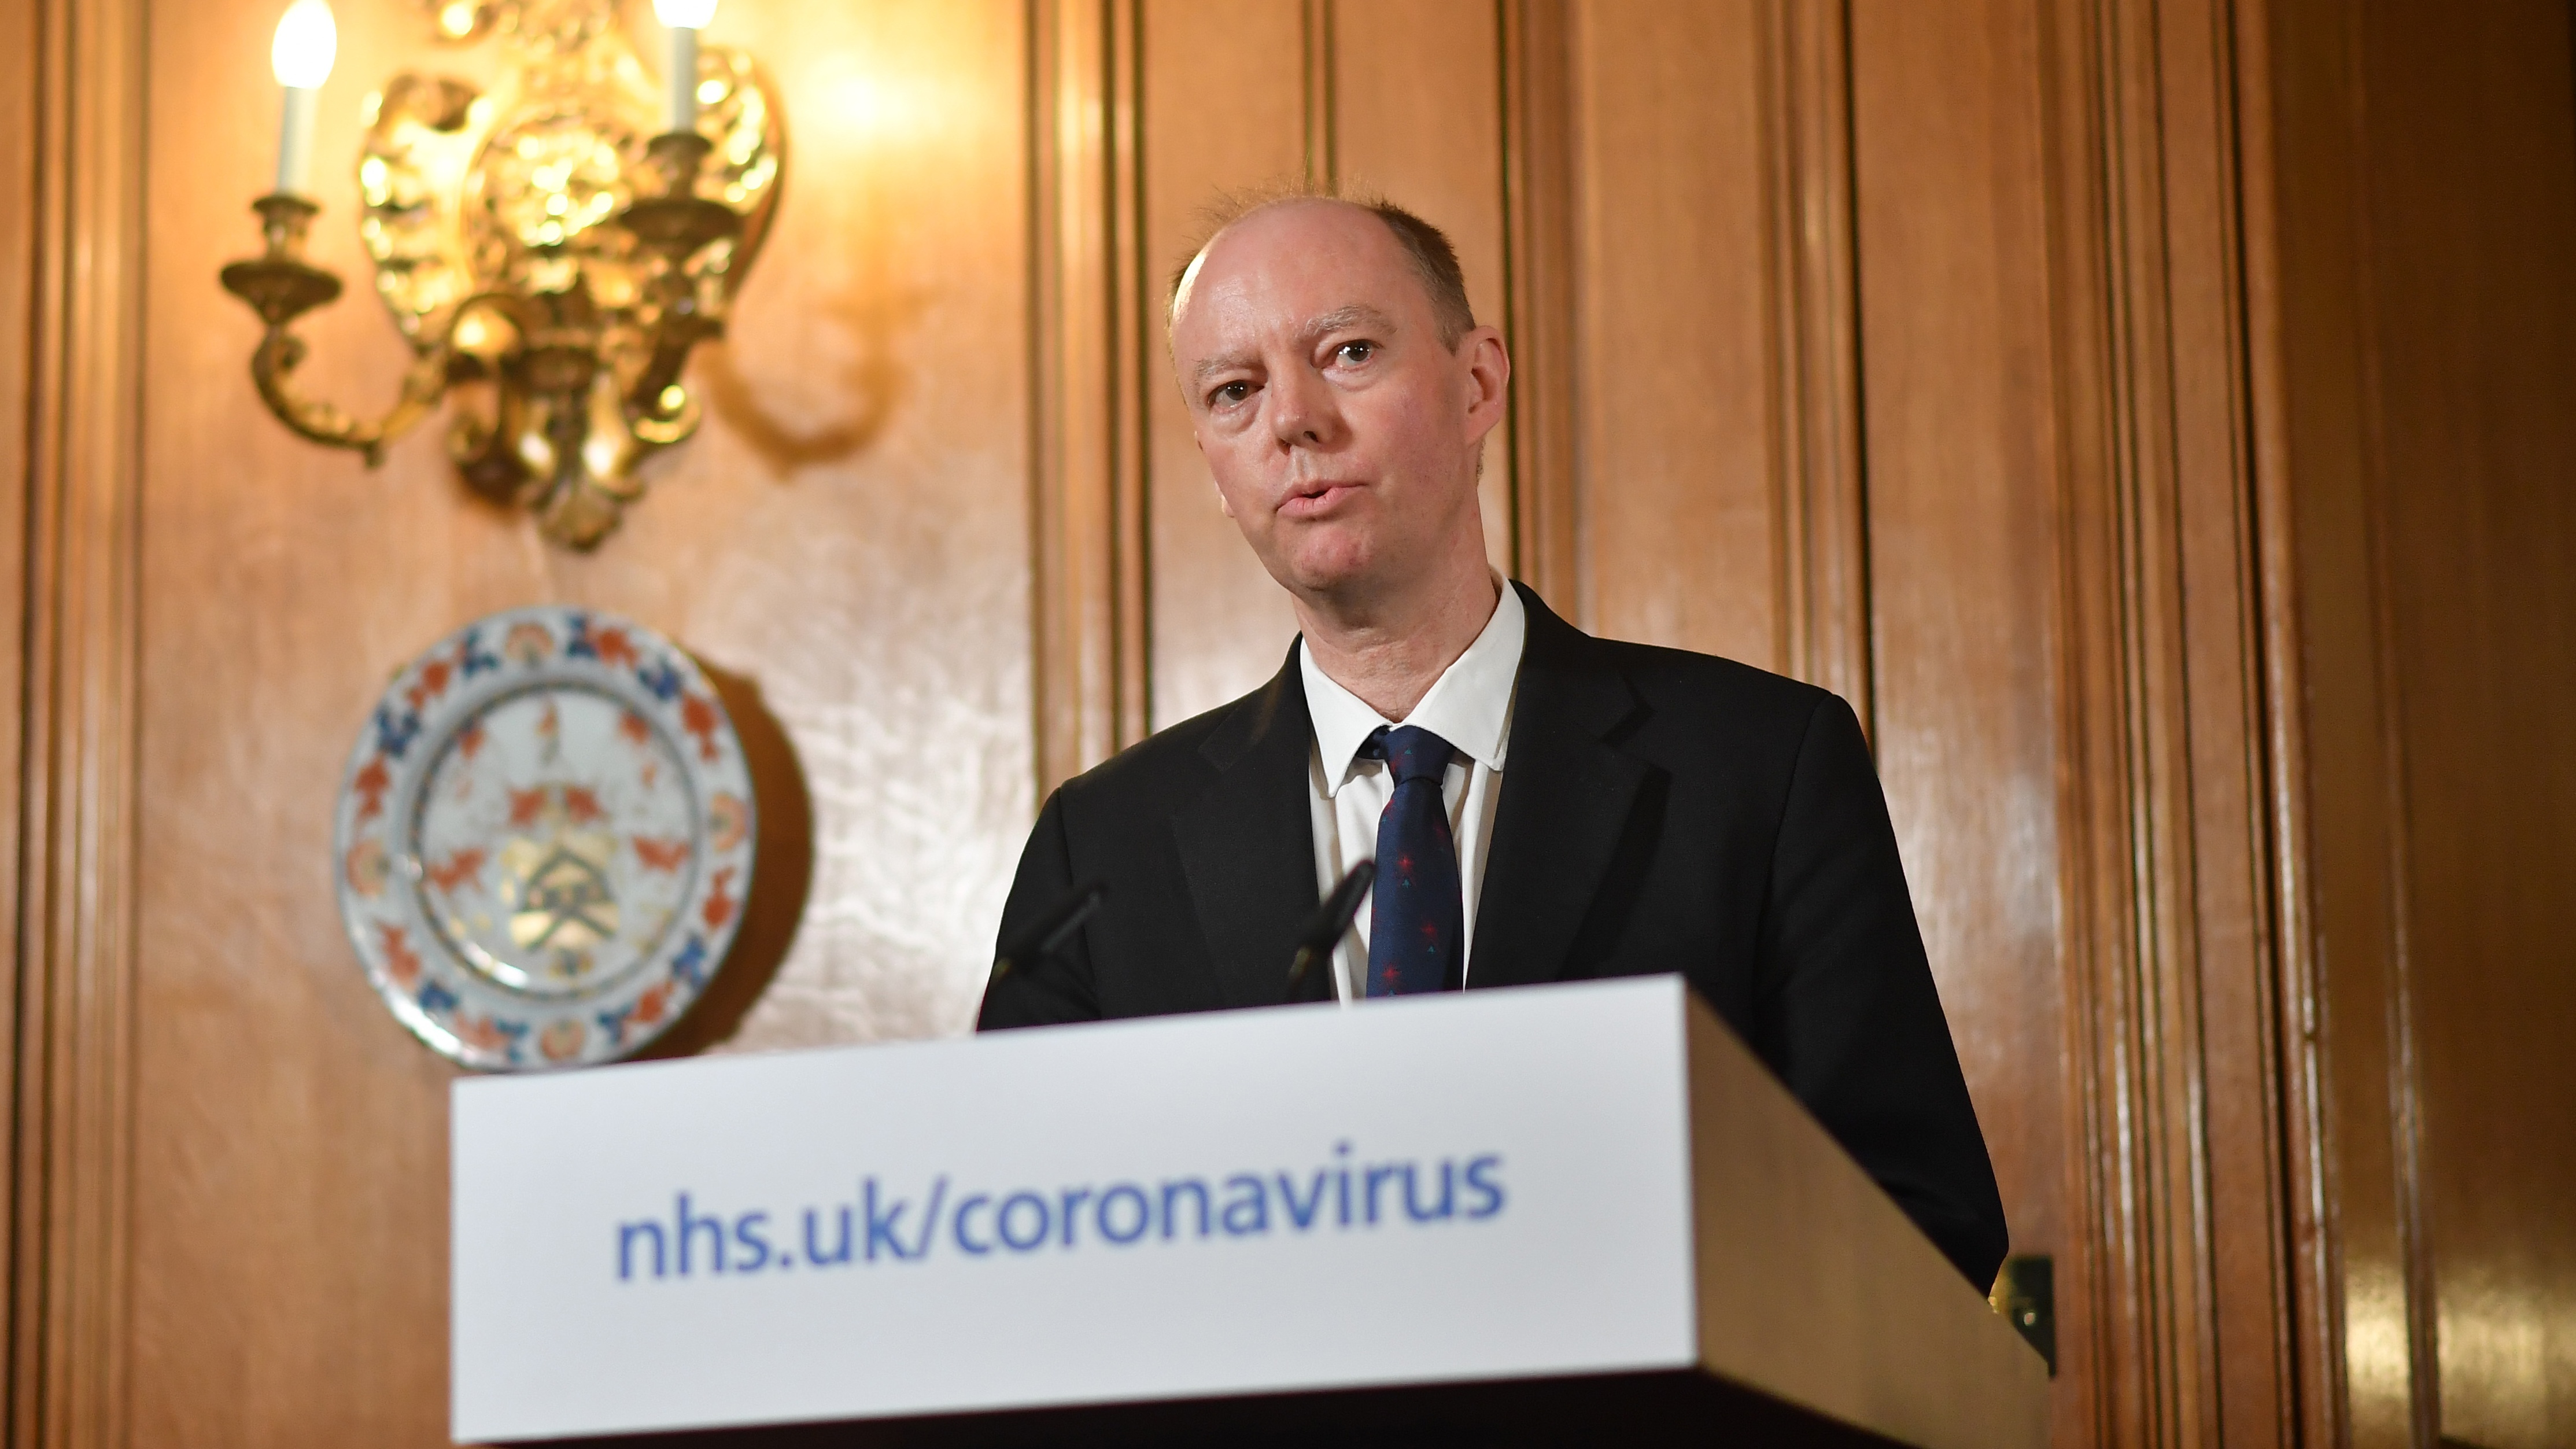 Chief Medical Officer Chris Whitty speaks during a press conference with Boris Johnson